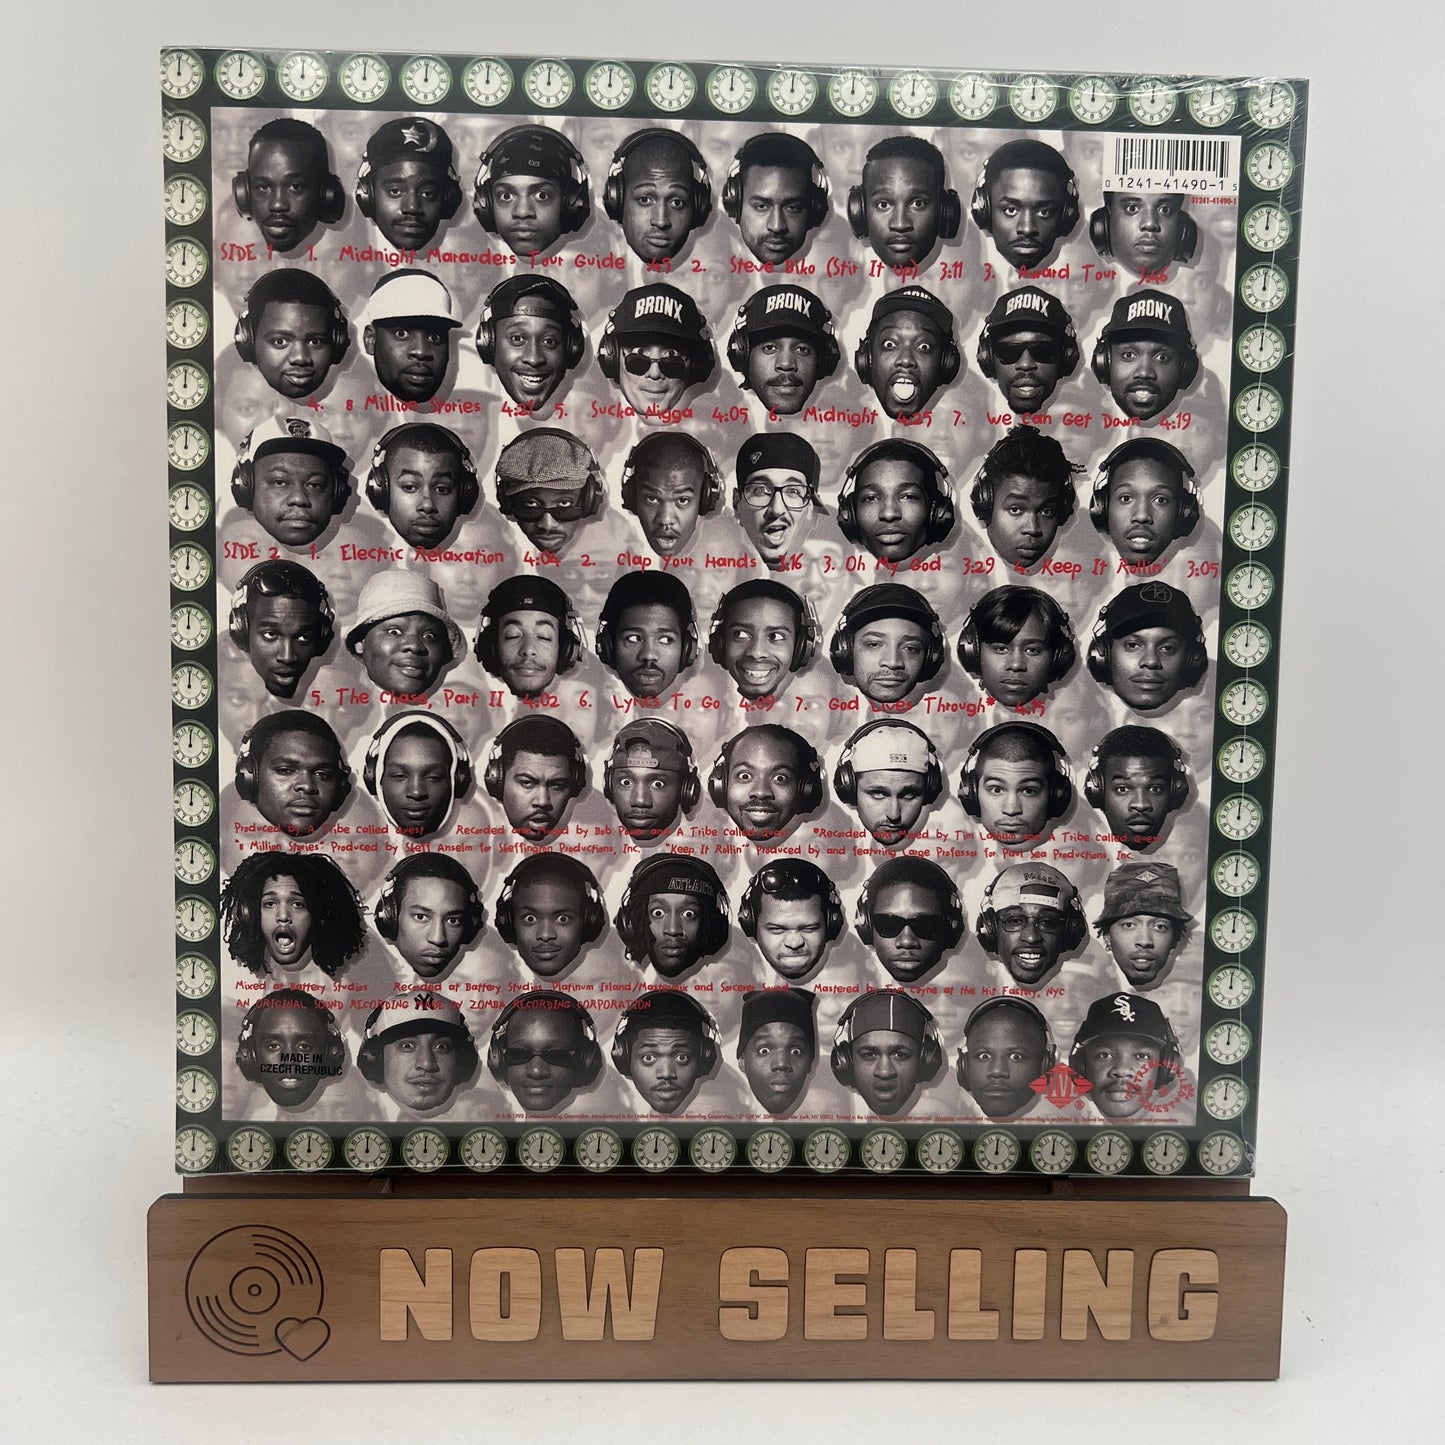 A Tribe Called Quest - Midnight Marauders Vinyl LP Reissue SEALED